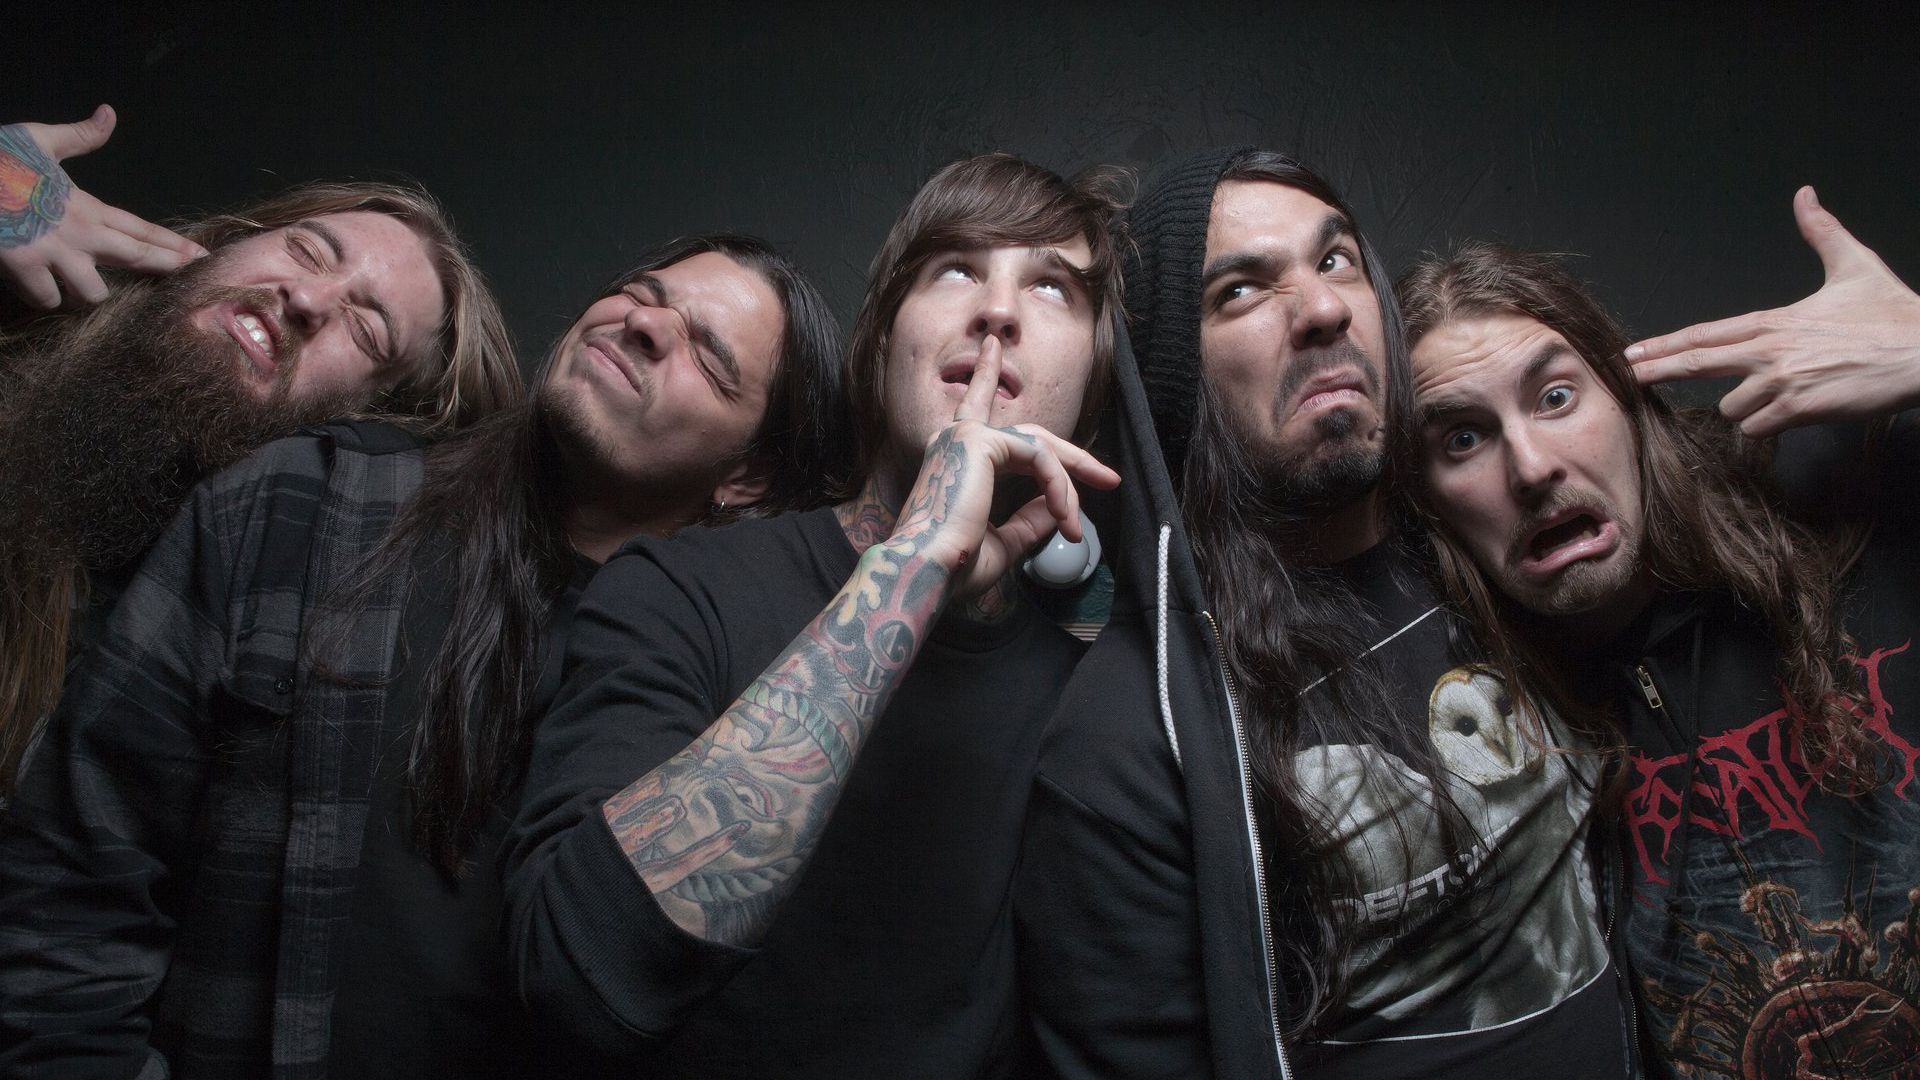 Full HD 1080p Suicide silence Wallpapers HD, Desktop Backgrounds